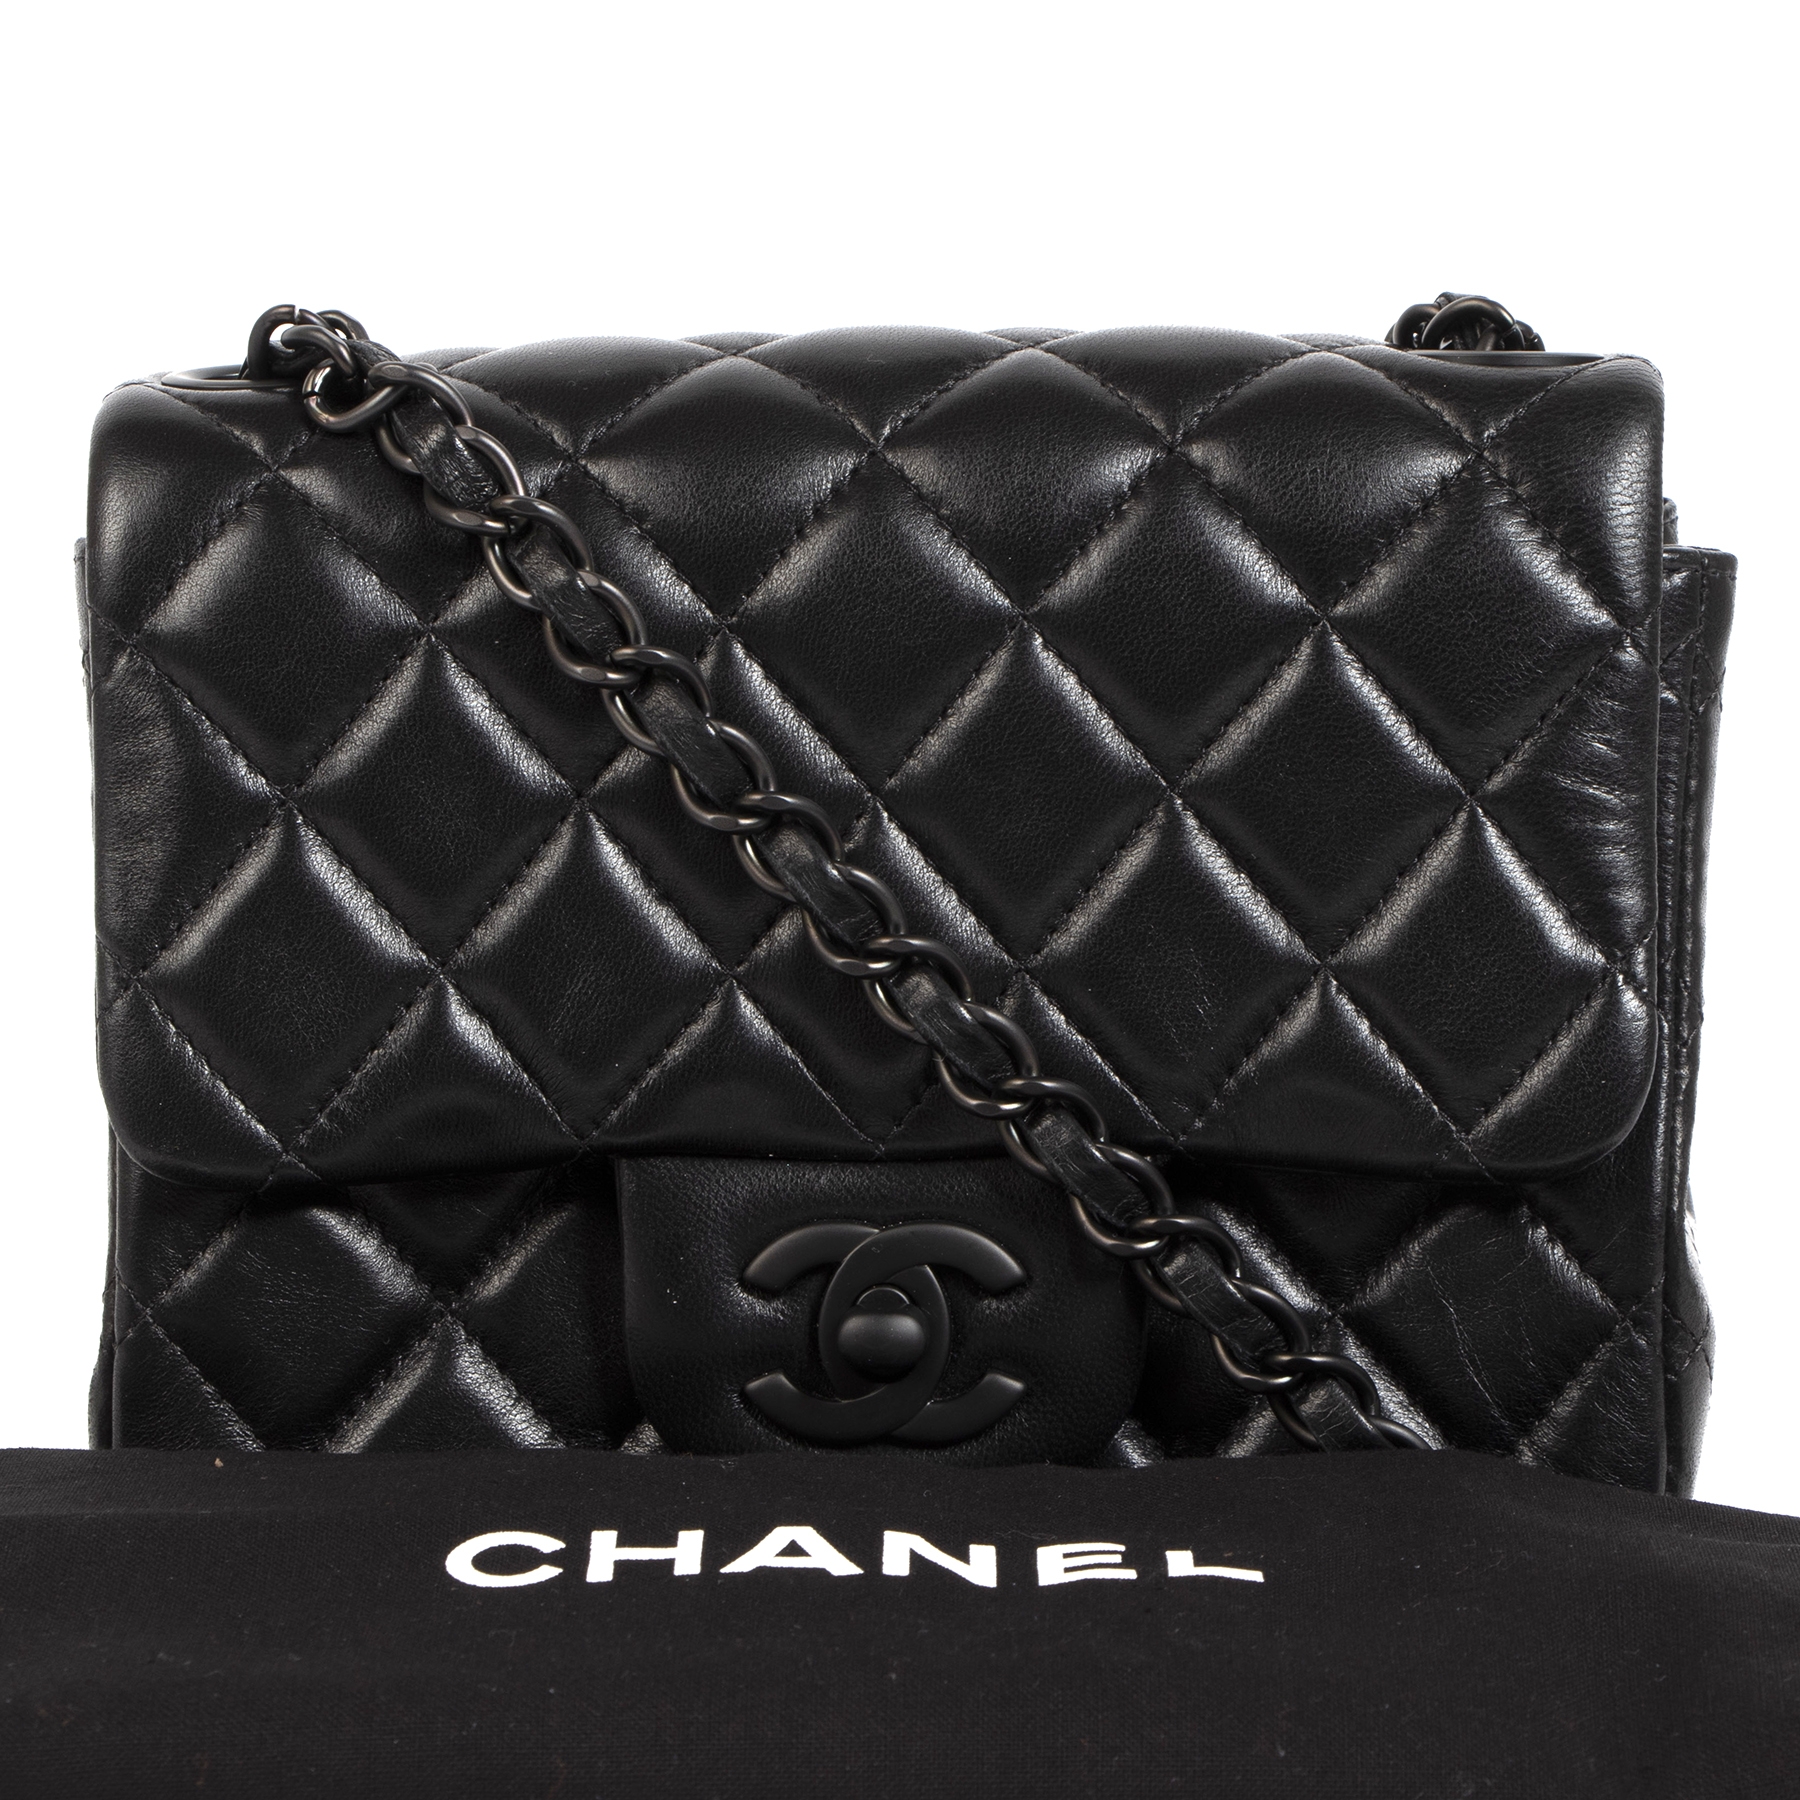 Authenticating the Chanel Mini Square Flap Bag  Academy by FASHIONPHILE